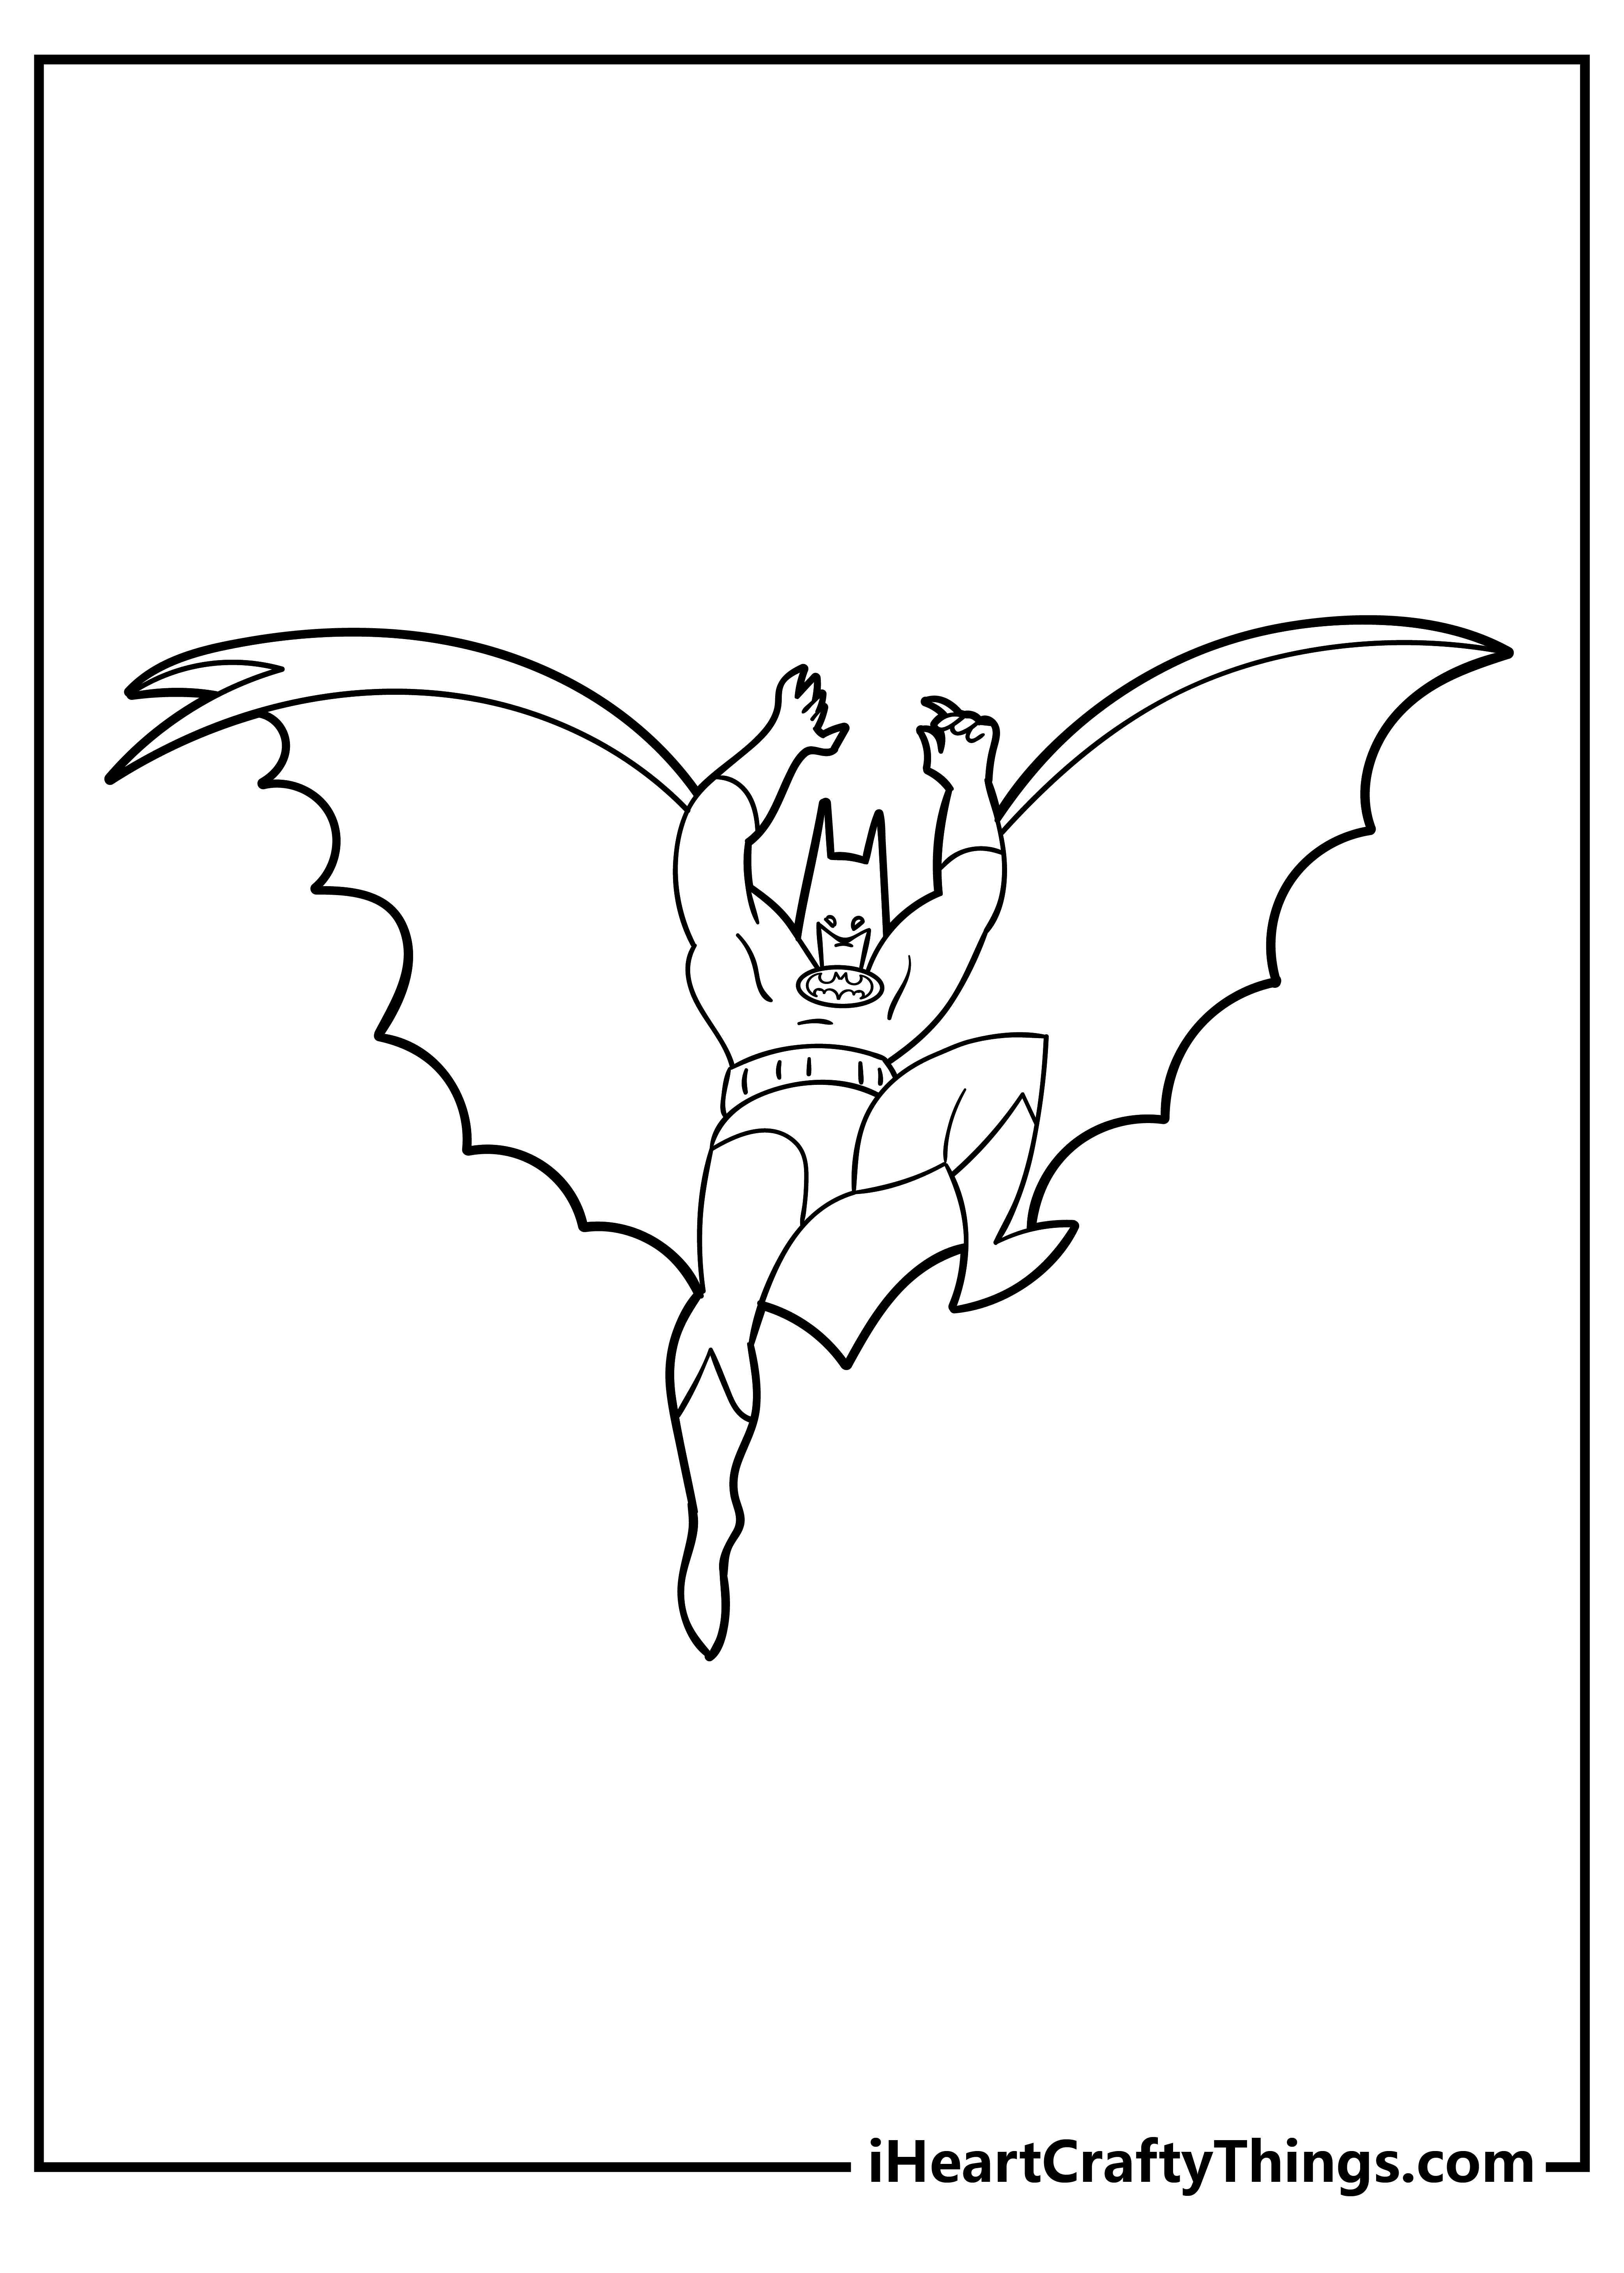 Batman Coloring Book for adults free download